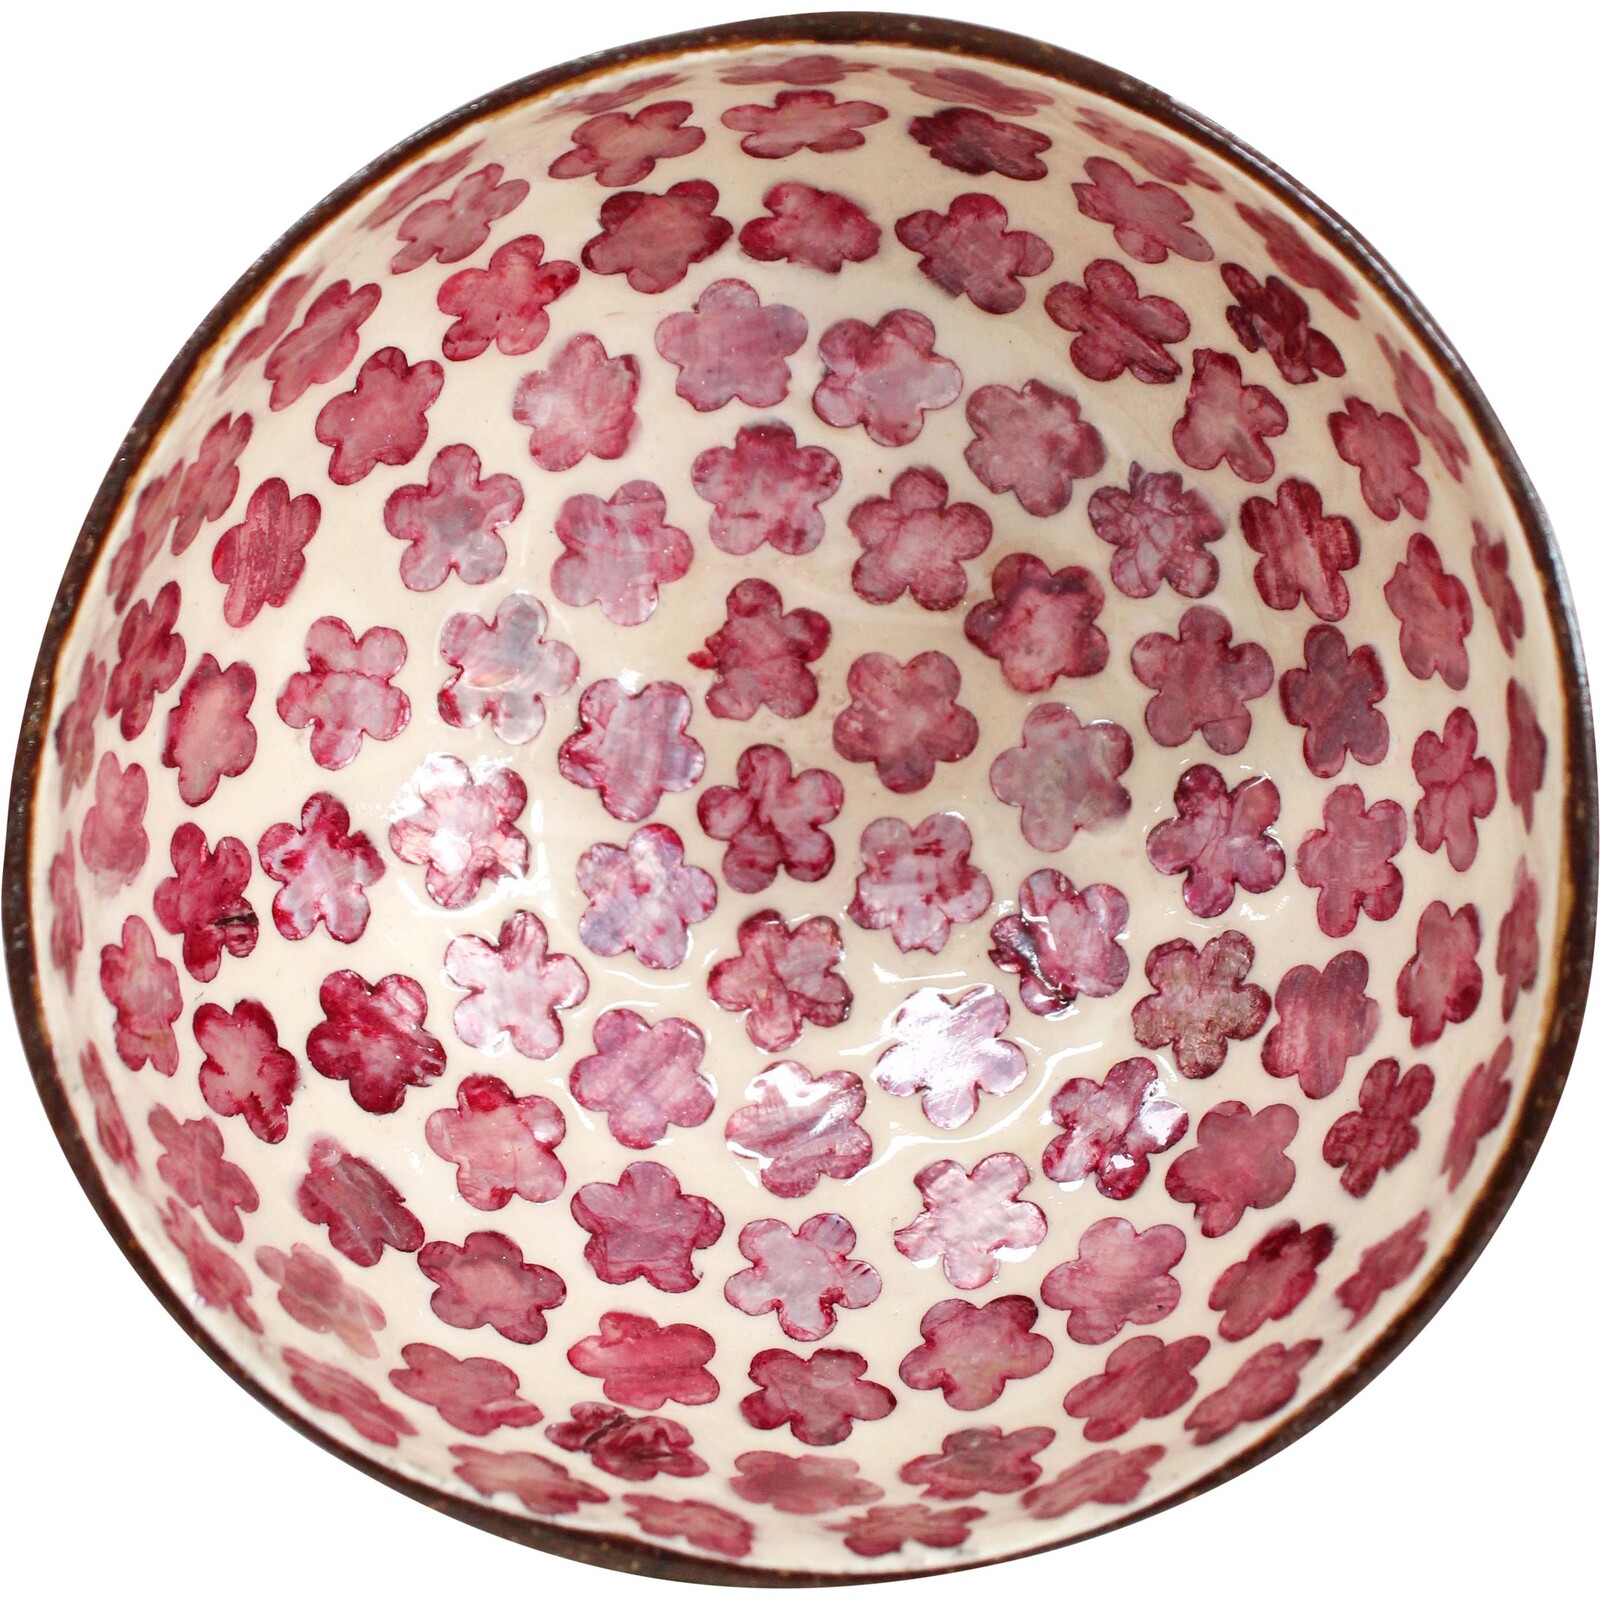 Coco Bowl Mulberry Daisy